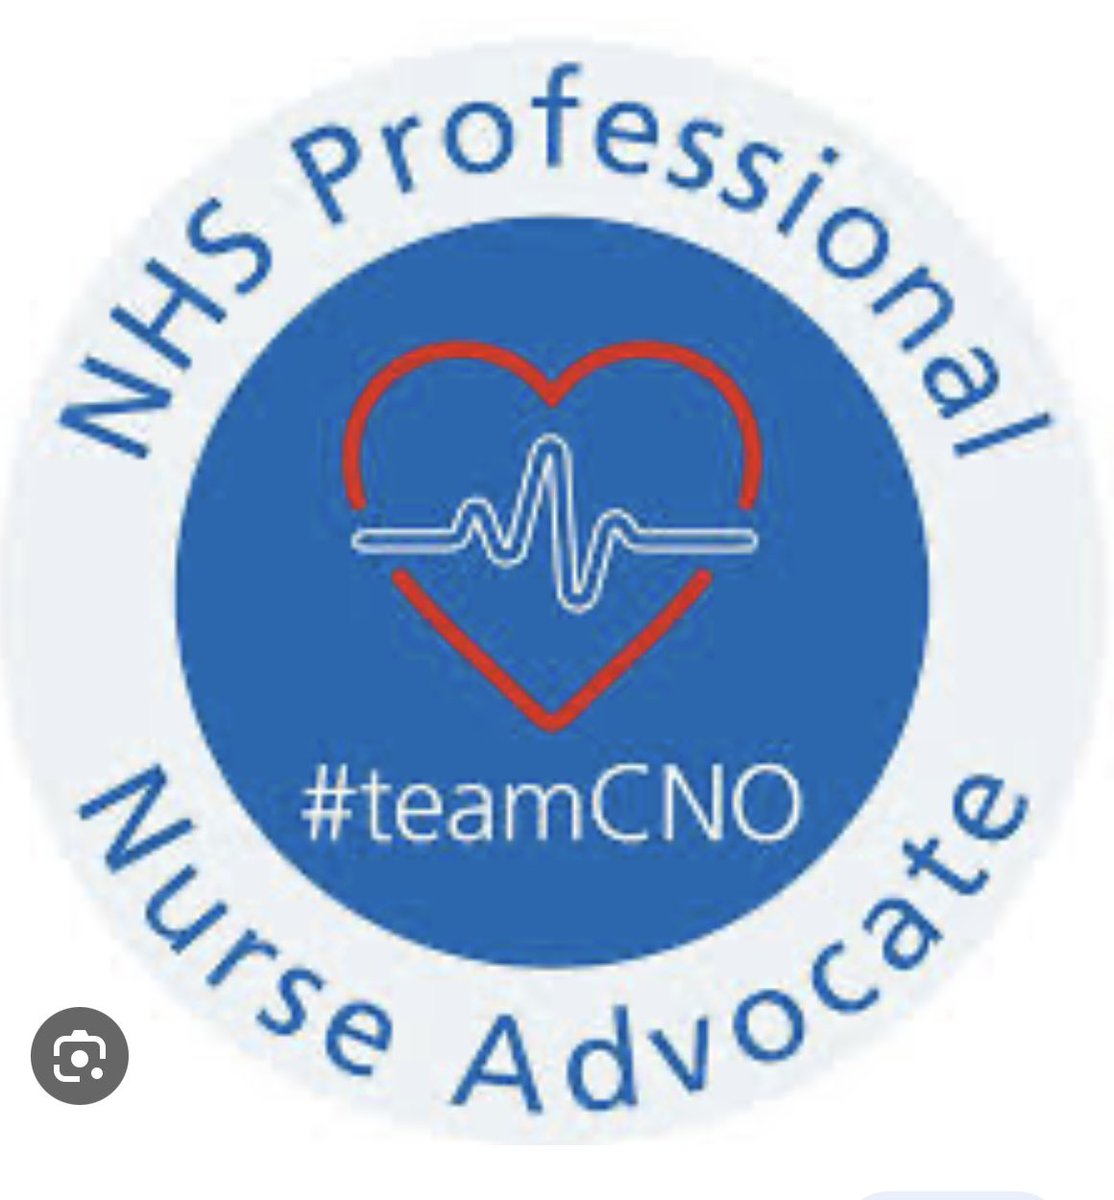 Many Congratulations to @hayley_bobz and @VickiEWilson80 who have passed their Professional Nurse Advocate Course. Hayley and Vicki are already providing restorative supervision sessions for our staff and teams. Well done to you both! #PNA #supervision #welldone 🤩👏🏻